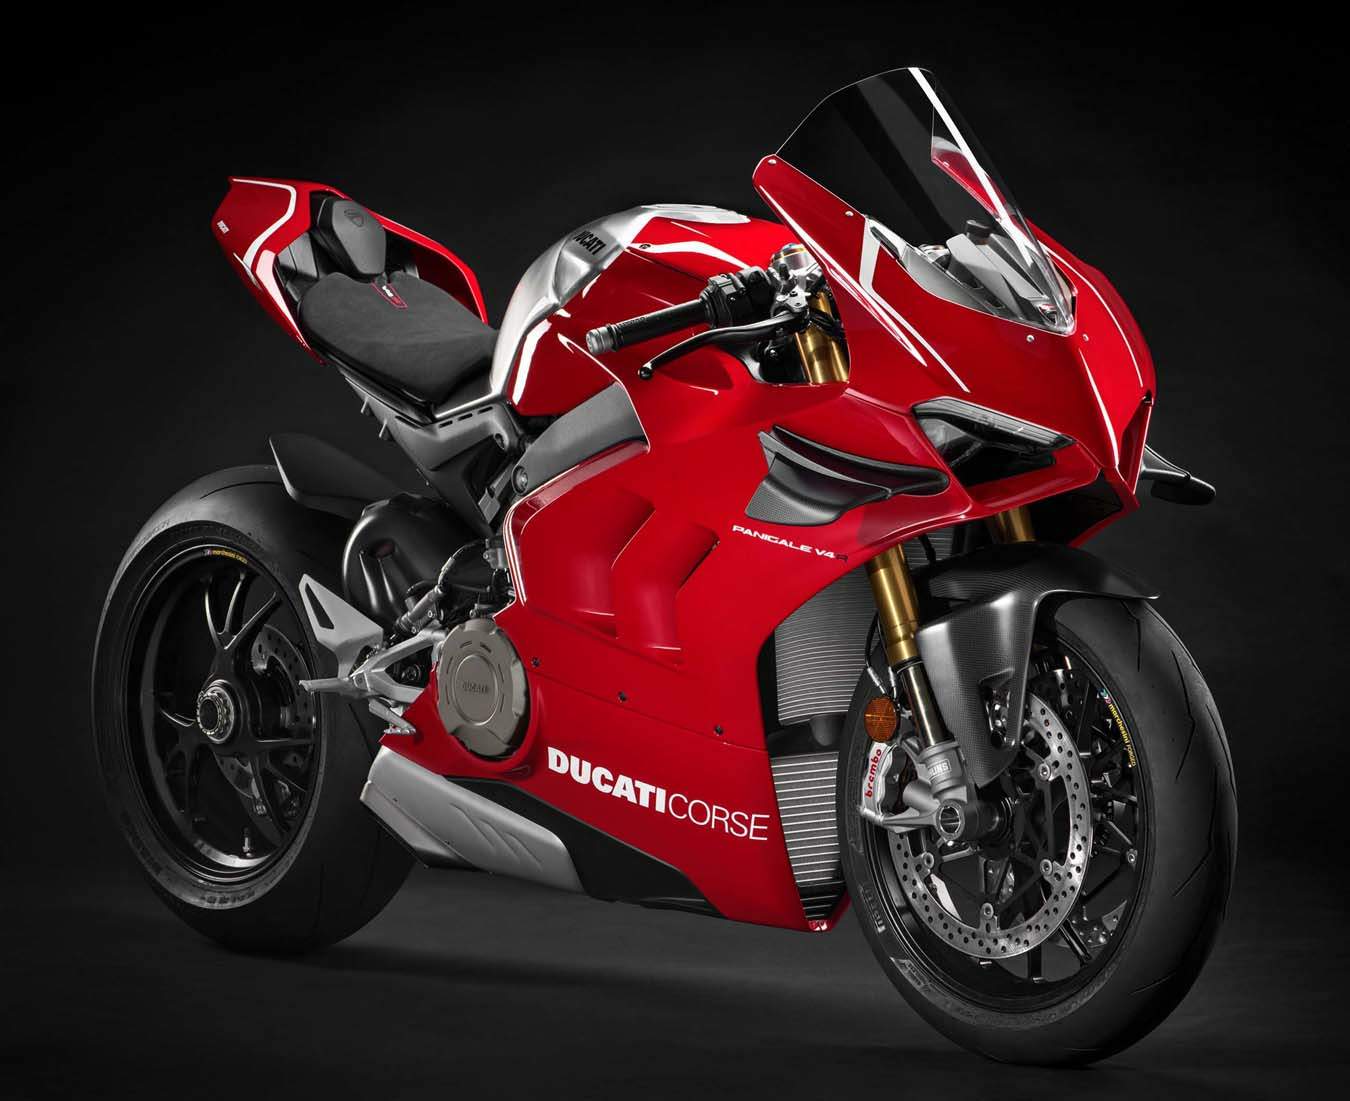 Ducati Panigale V4 R 2019 запчасти